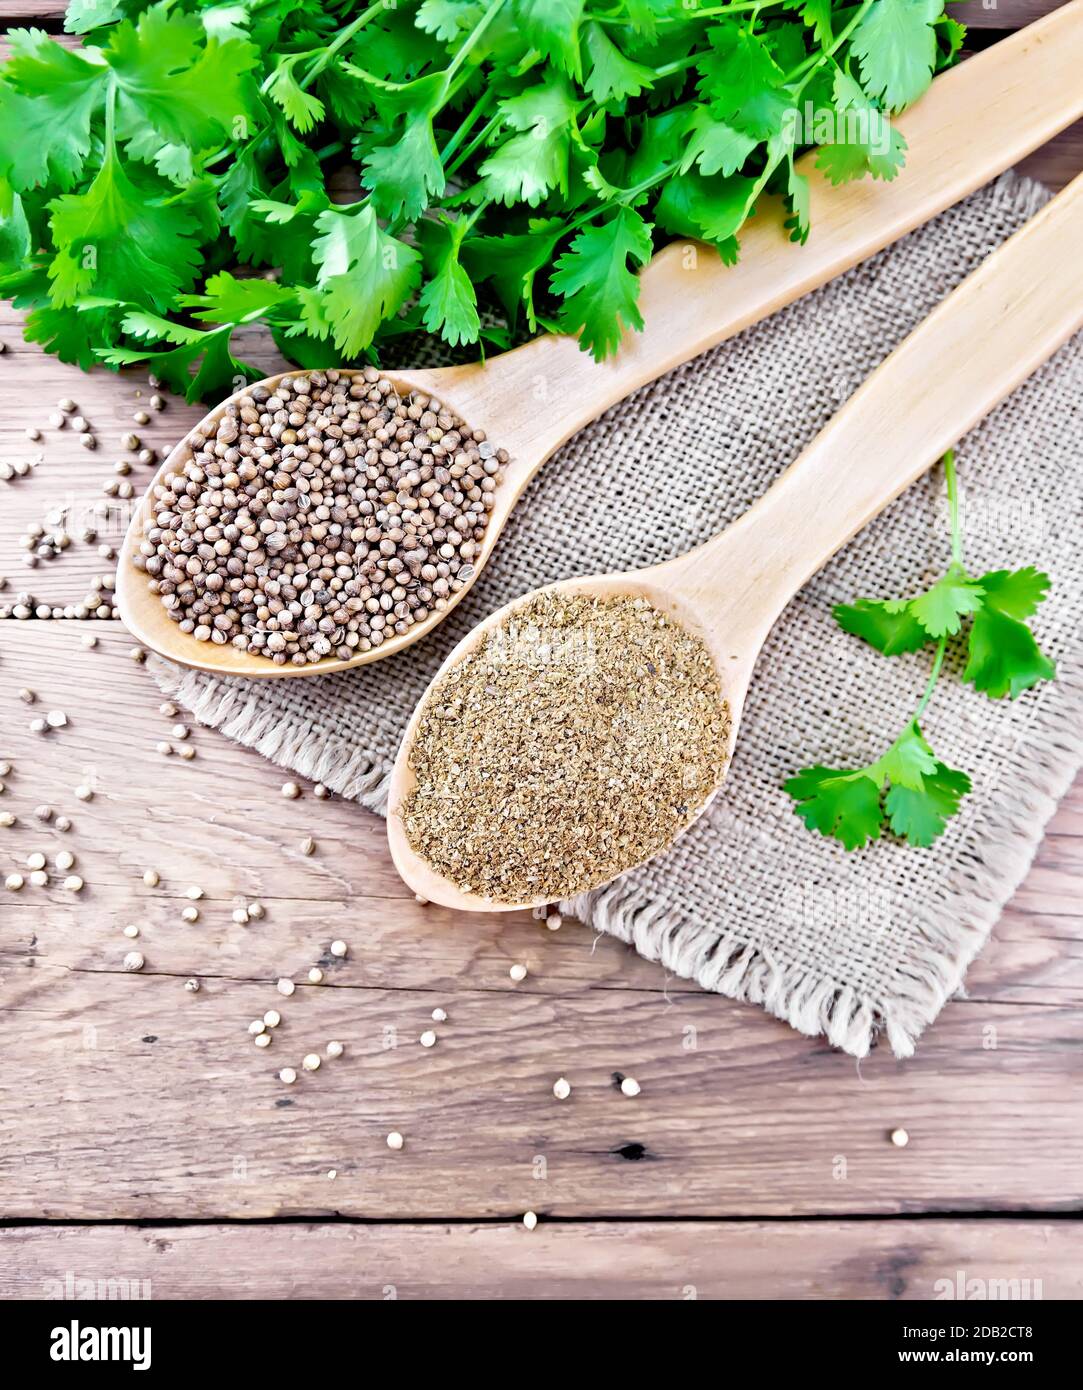 Coriander seeds and ground in two spoons on burlap, fresh green cilantro on a wooden board background from above Stock Photo